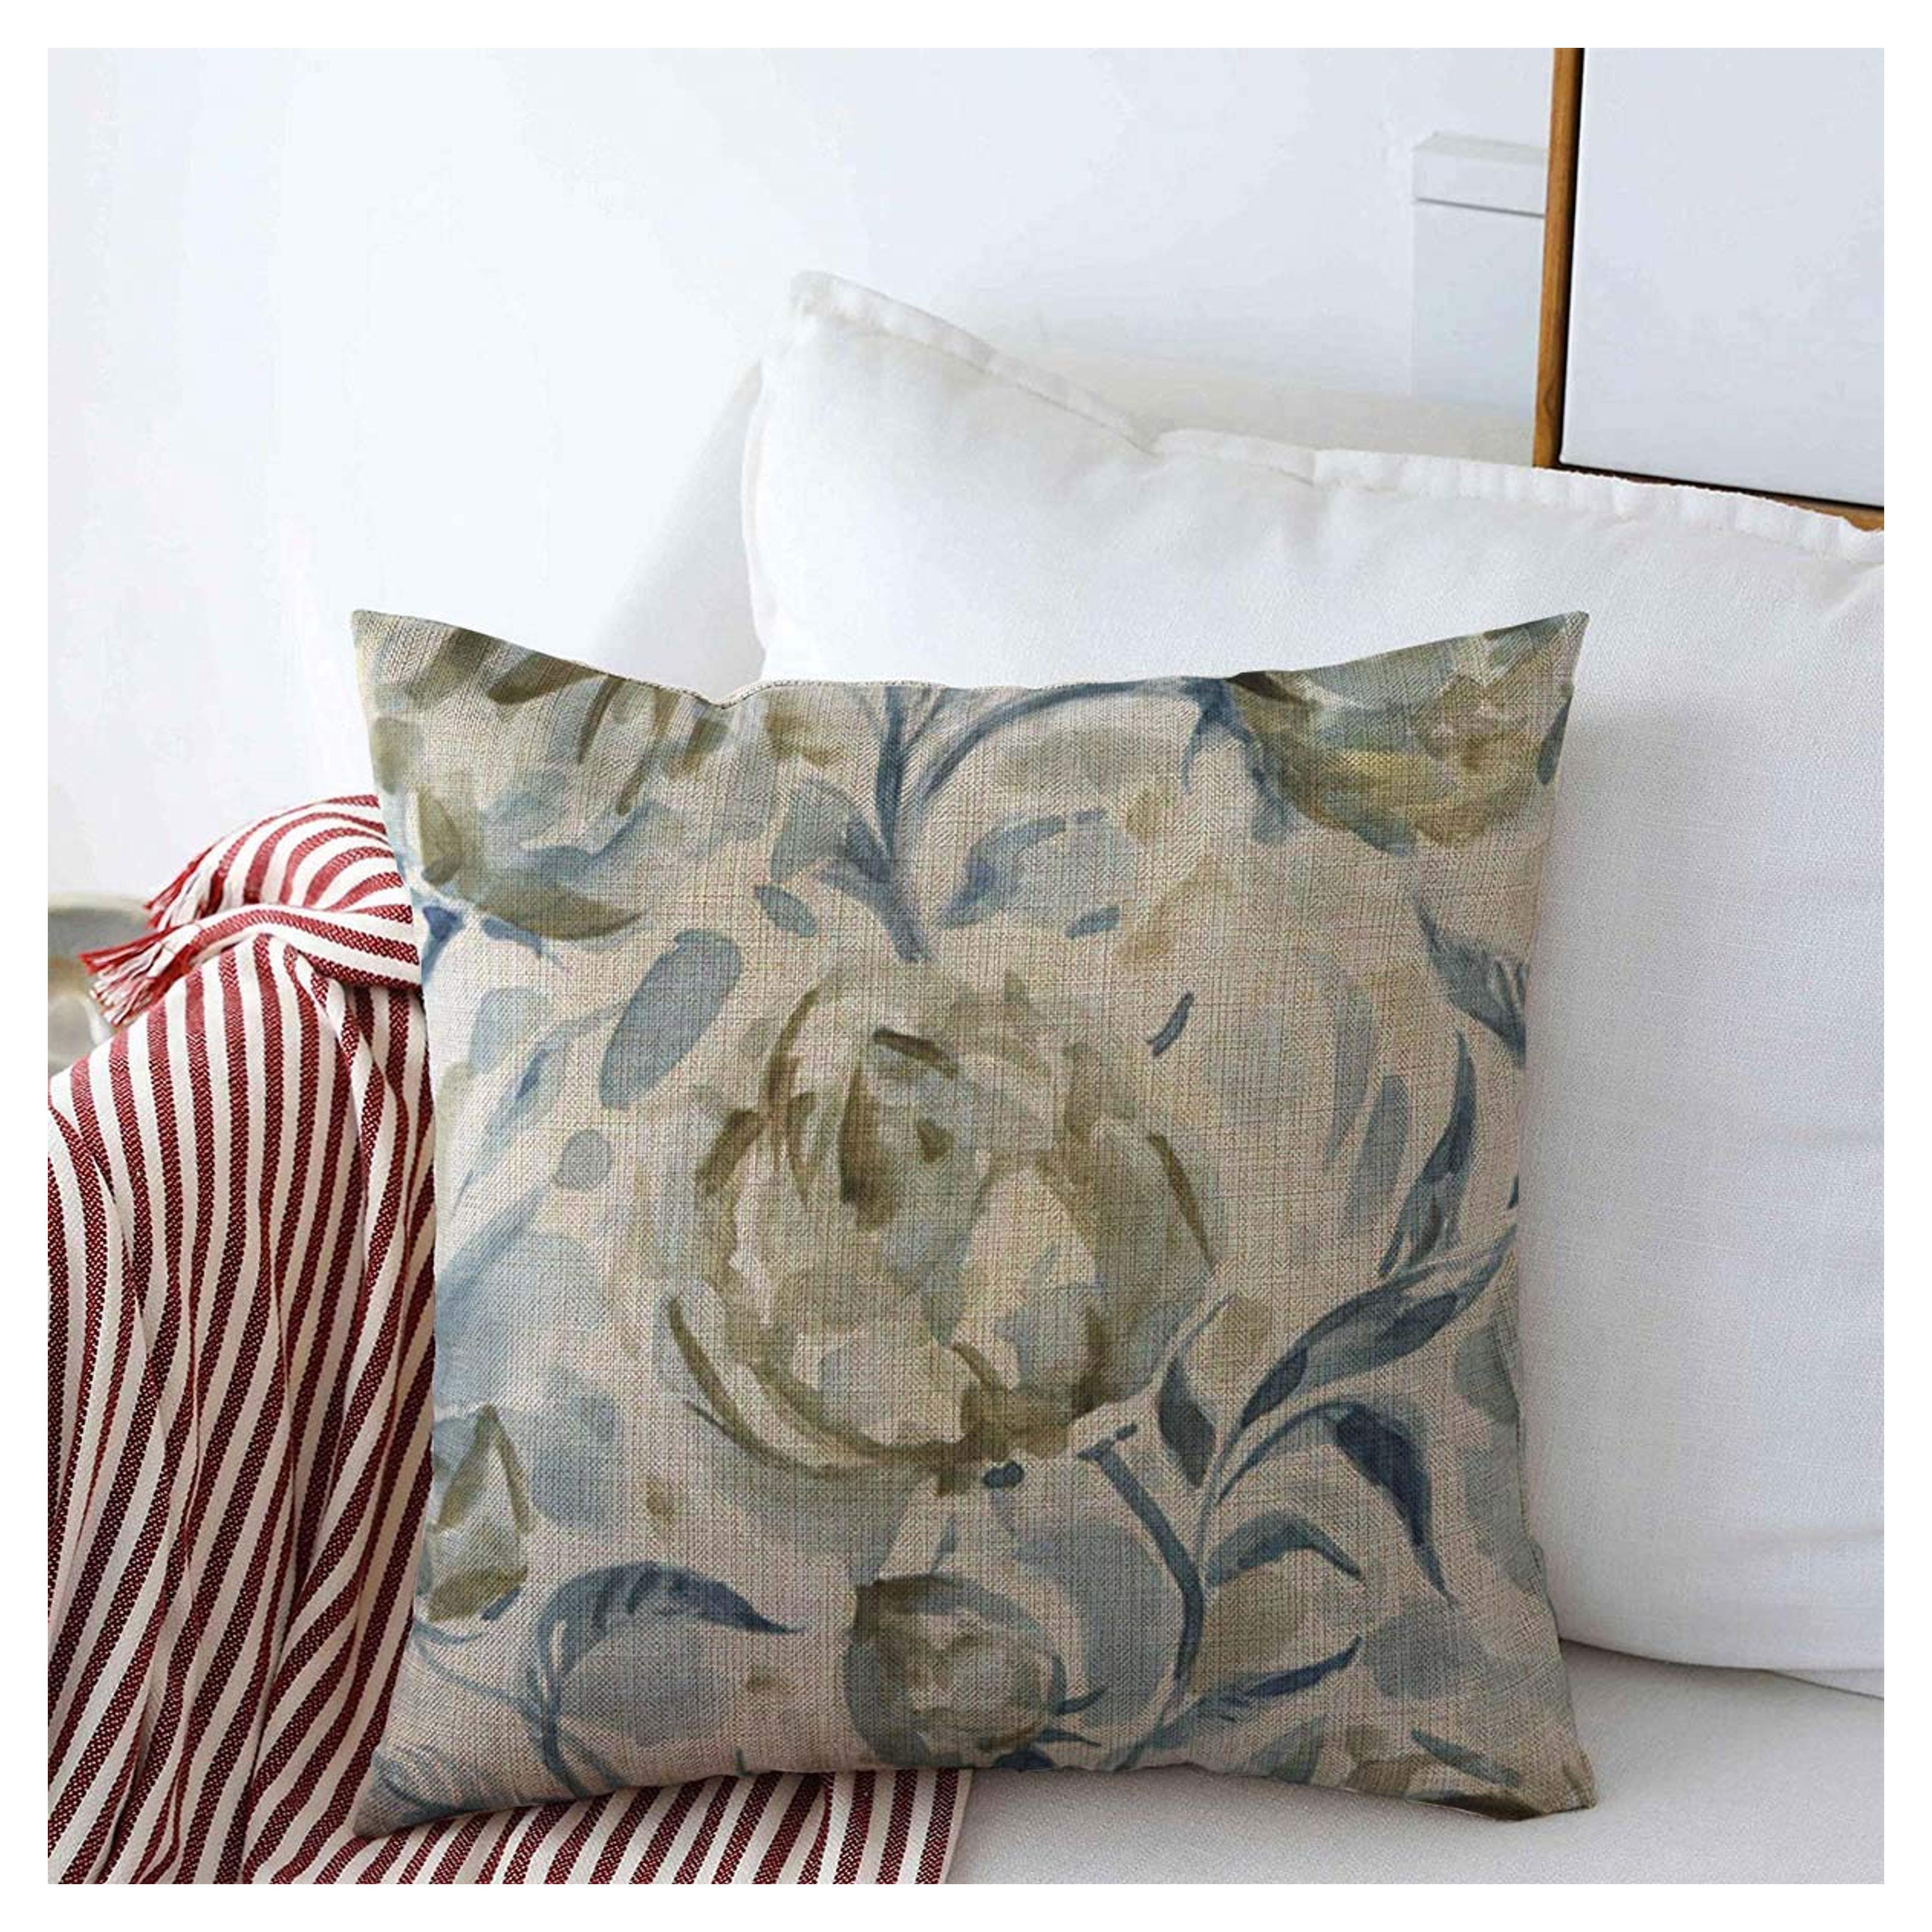 Amazon.com: Throw Pillow Covers 16" x 16" Rose Abstract Roses Hand Drawn Floral Pattern Watercolor Bright Nature Flower Artistic Blossom Design Cushion Square Linen Pillowcase for Winter Home Decoration : Home & Kitchen